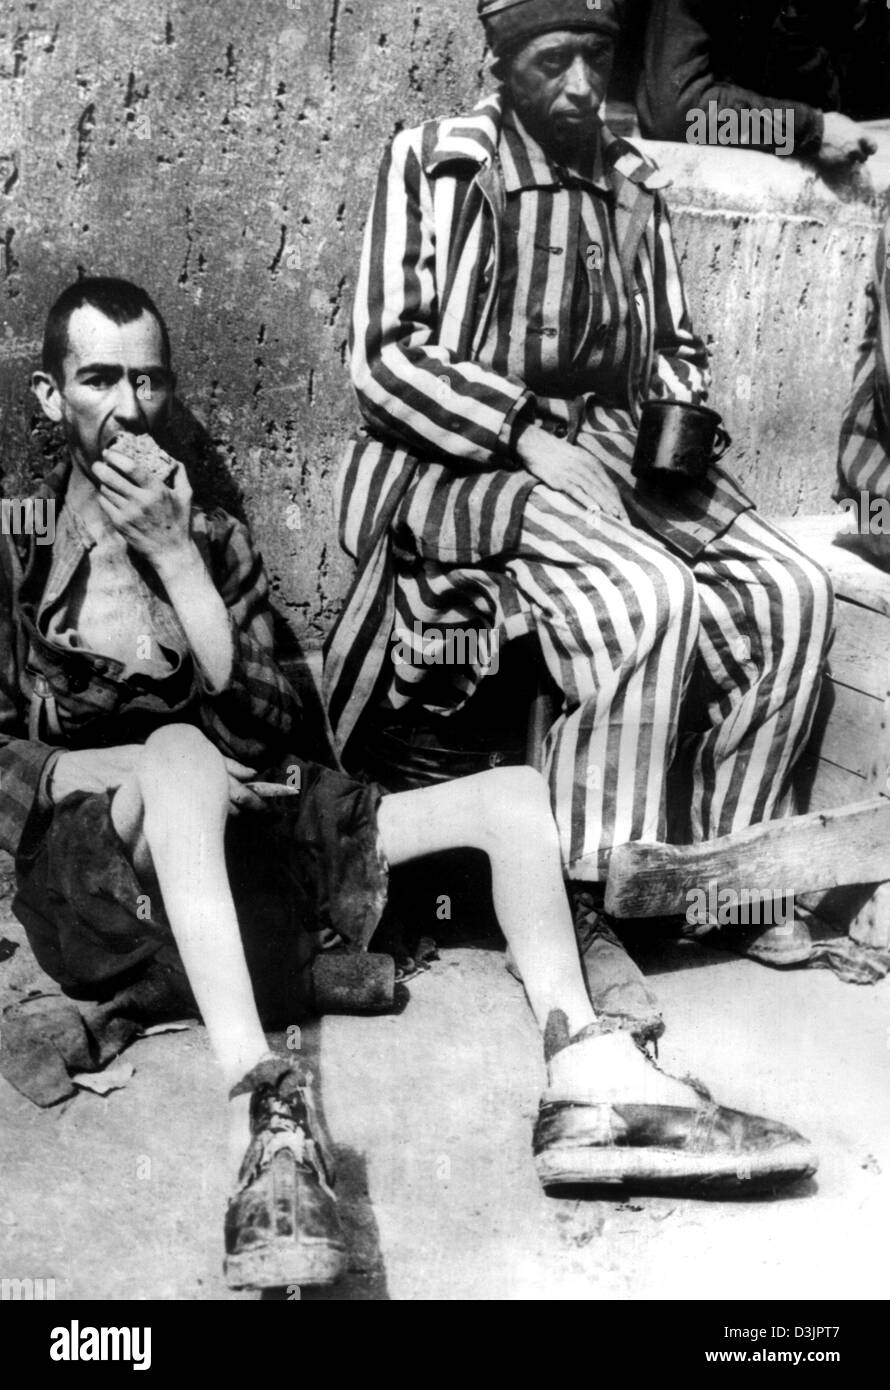 (dpa files) - Two emaciated fromer prisoners lean against a wall while eating a loaf of bread after the liberation of the Buchenwald concentration camp by the 3rd US Army in Buchenwald, Germany, 13 April 1945. Stock Photo